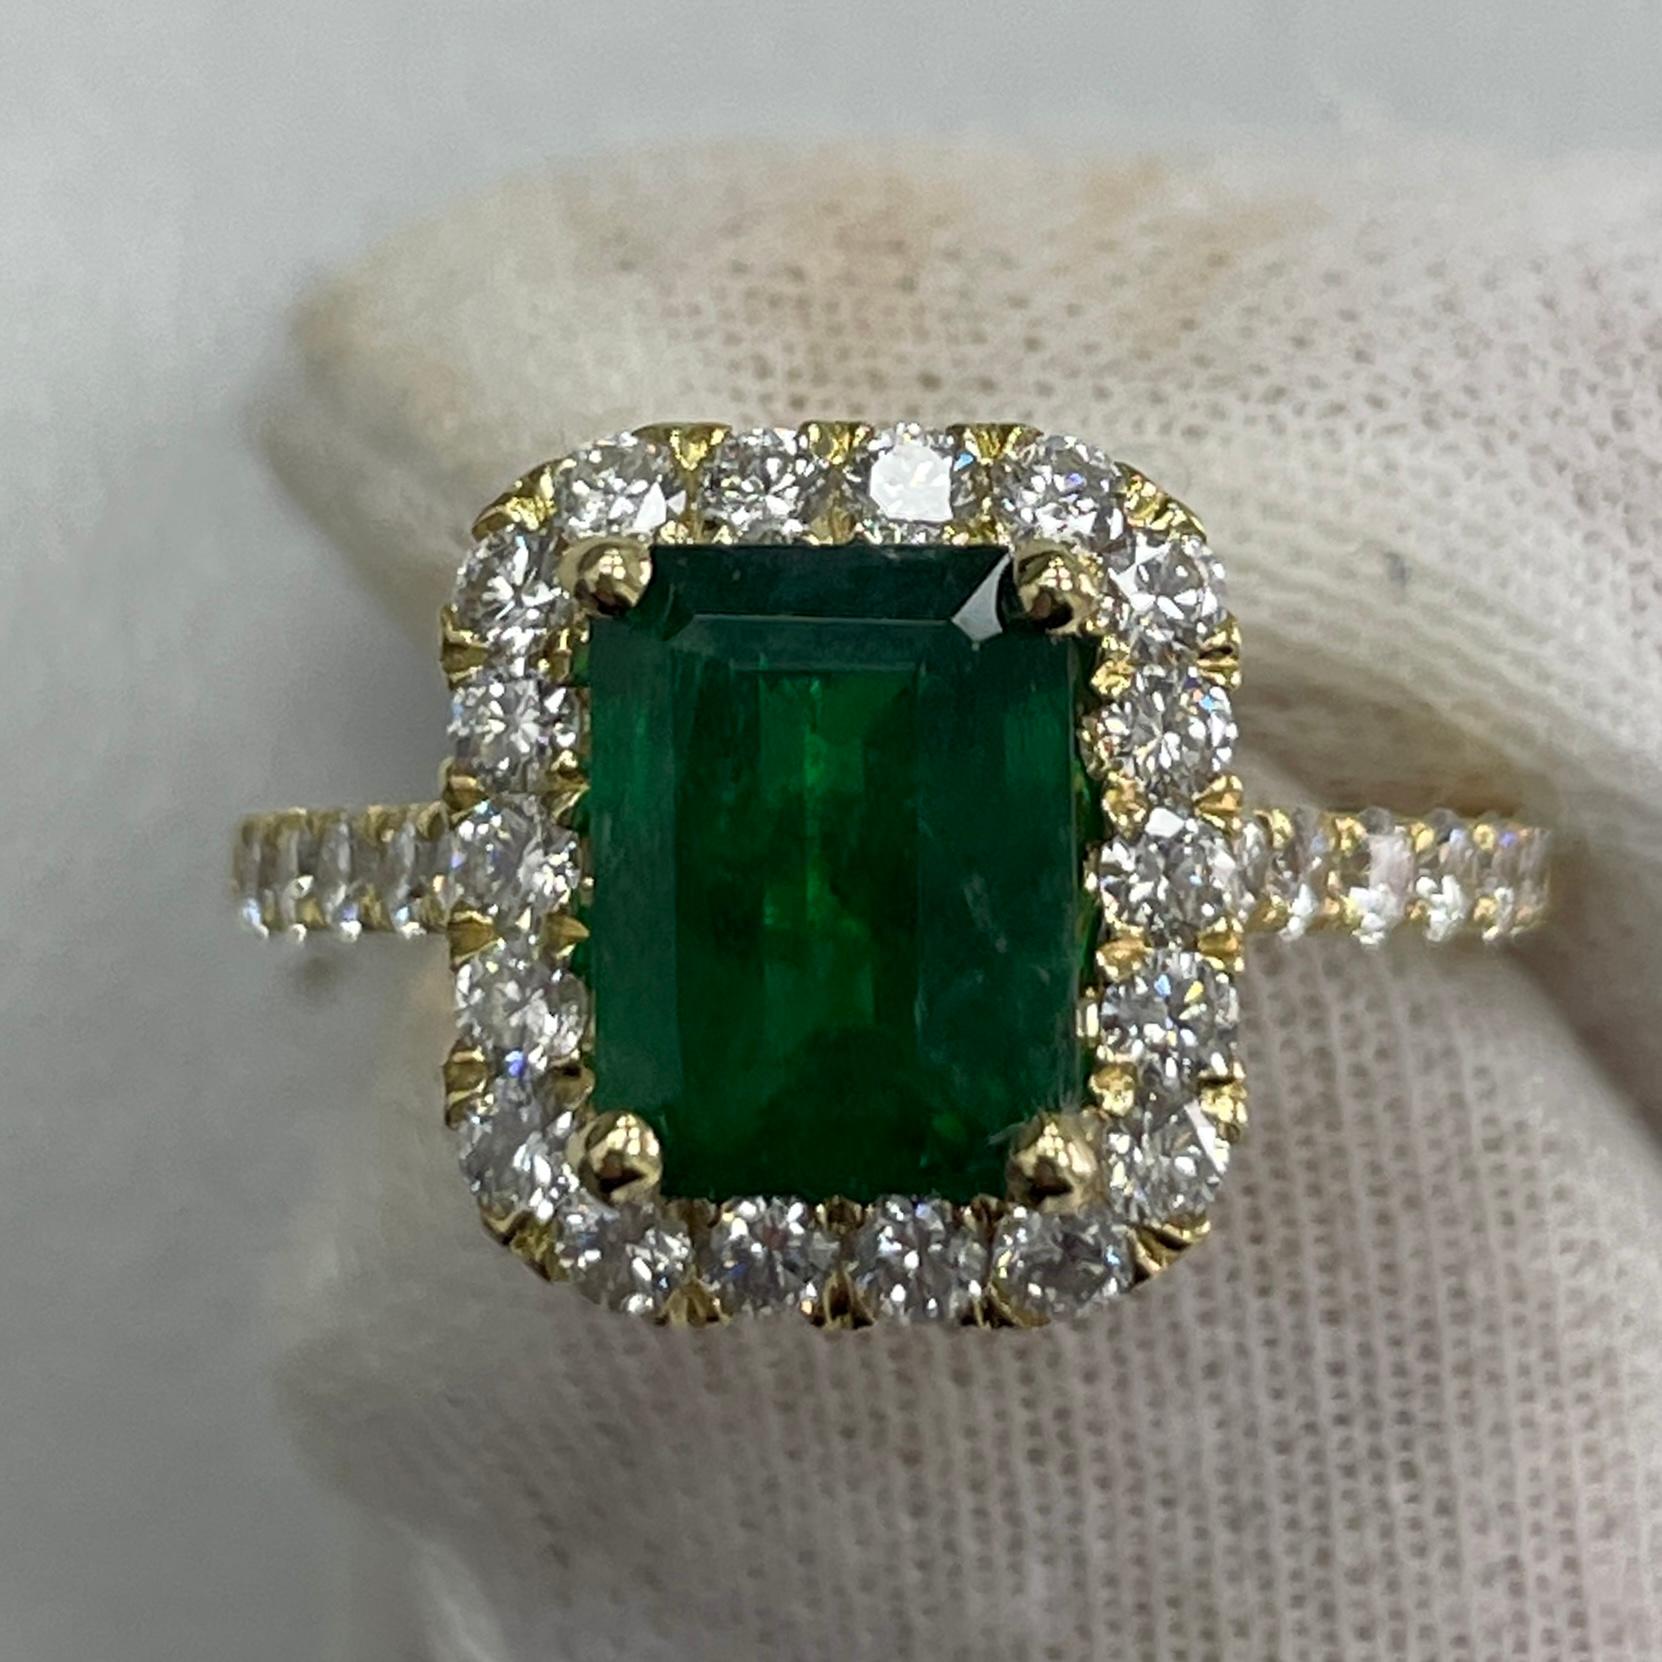 This is a BREATHTAKING emerald mined in Zambia. It is fully saturated. This emerald has a beautiful ever green color and mounted in a detailed and 18K yellow gold ring with 0.99carats of brilliant white diamonds.